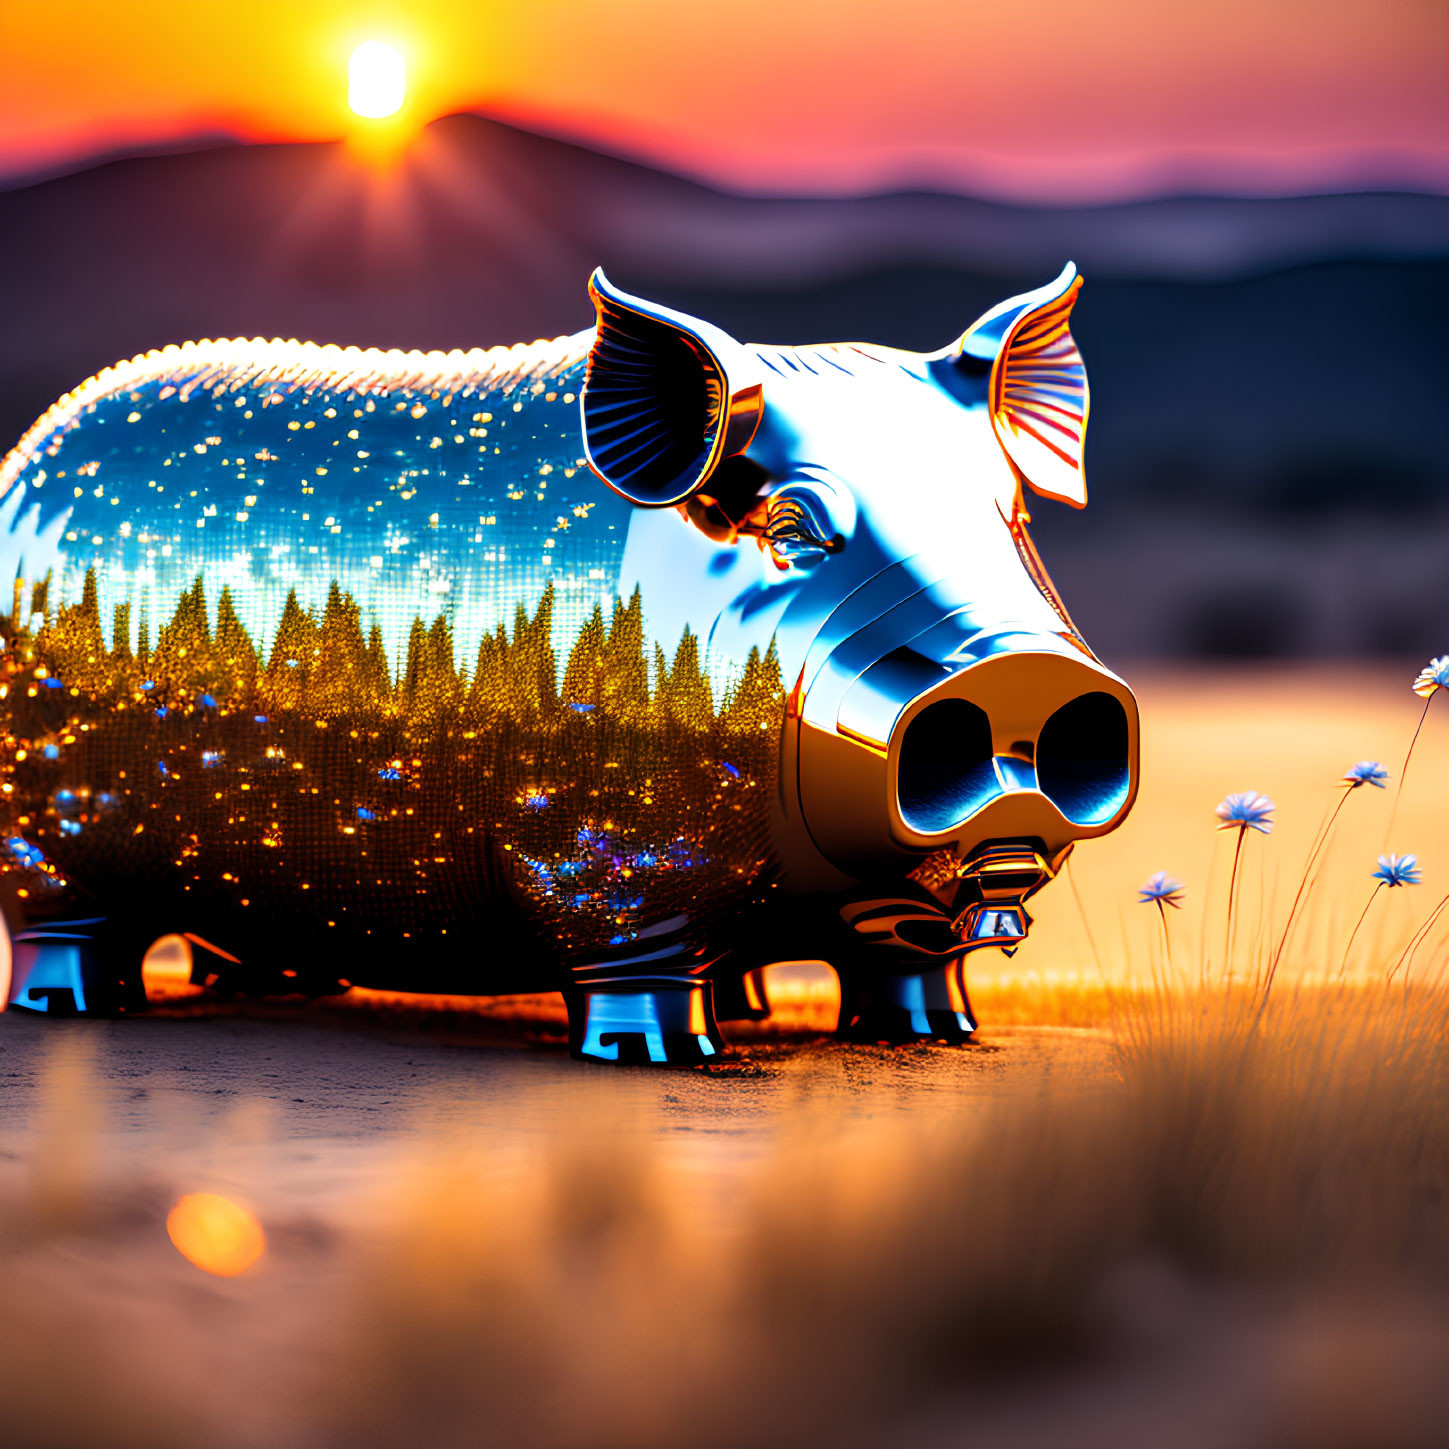 Illuminated pig-shaped structure in forest pattern at sunset